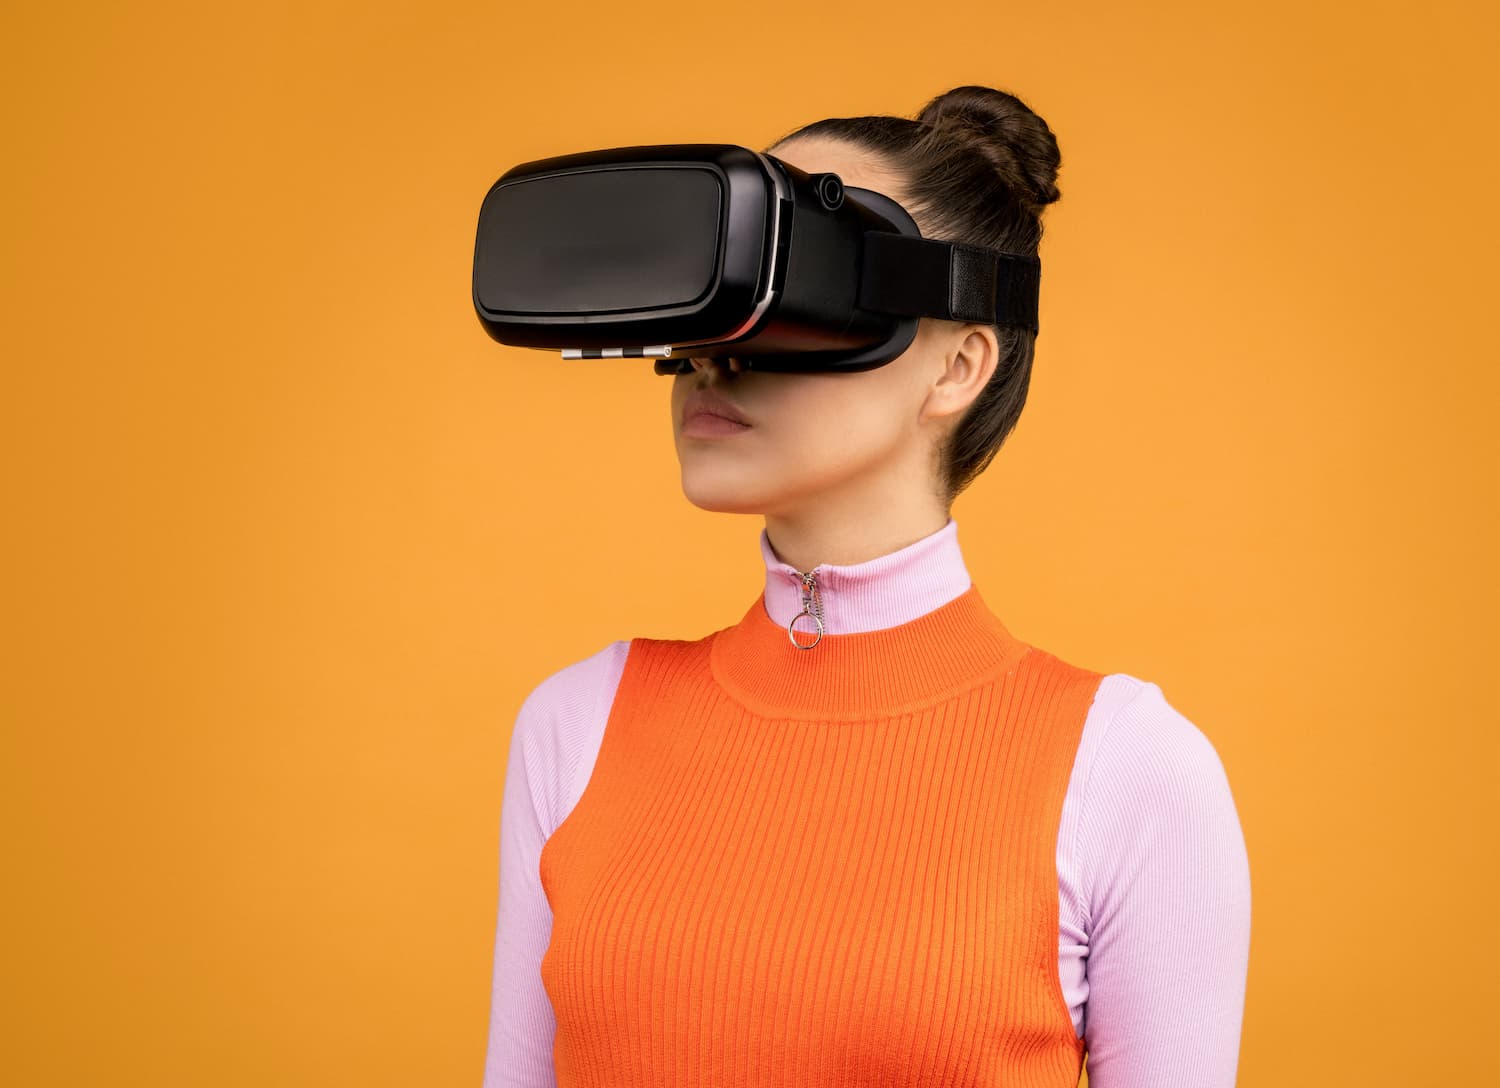  employee wearing VR headset in front of an orange background